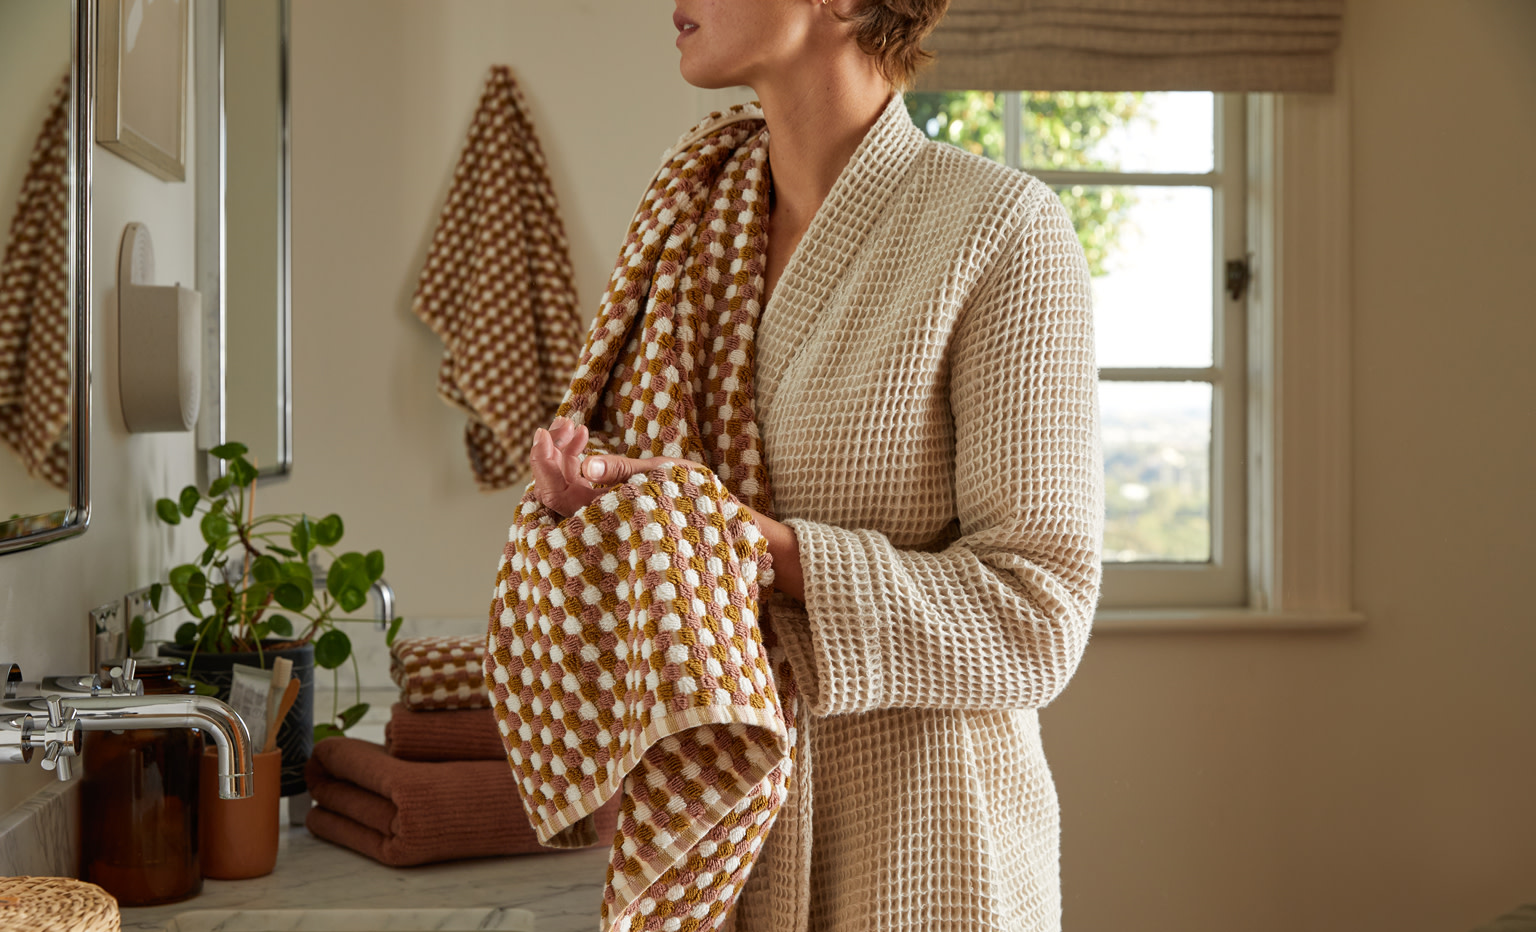 Woman standing in a bathroom wearing a tan waffle robe wiping her hands with a mosaic hand towel